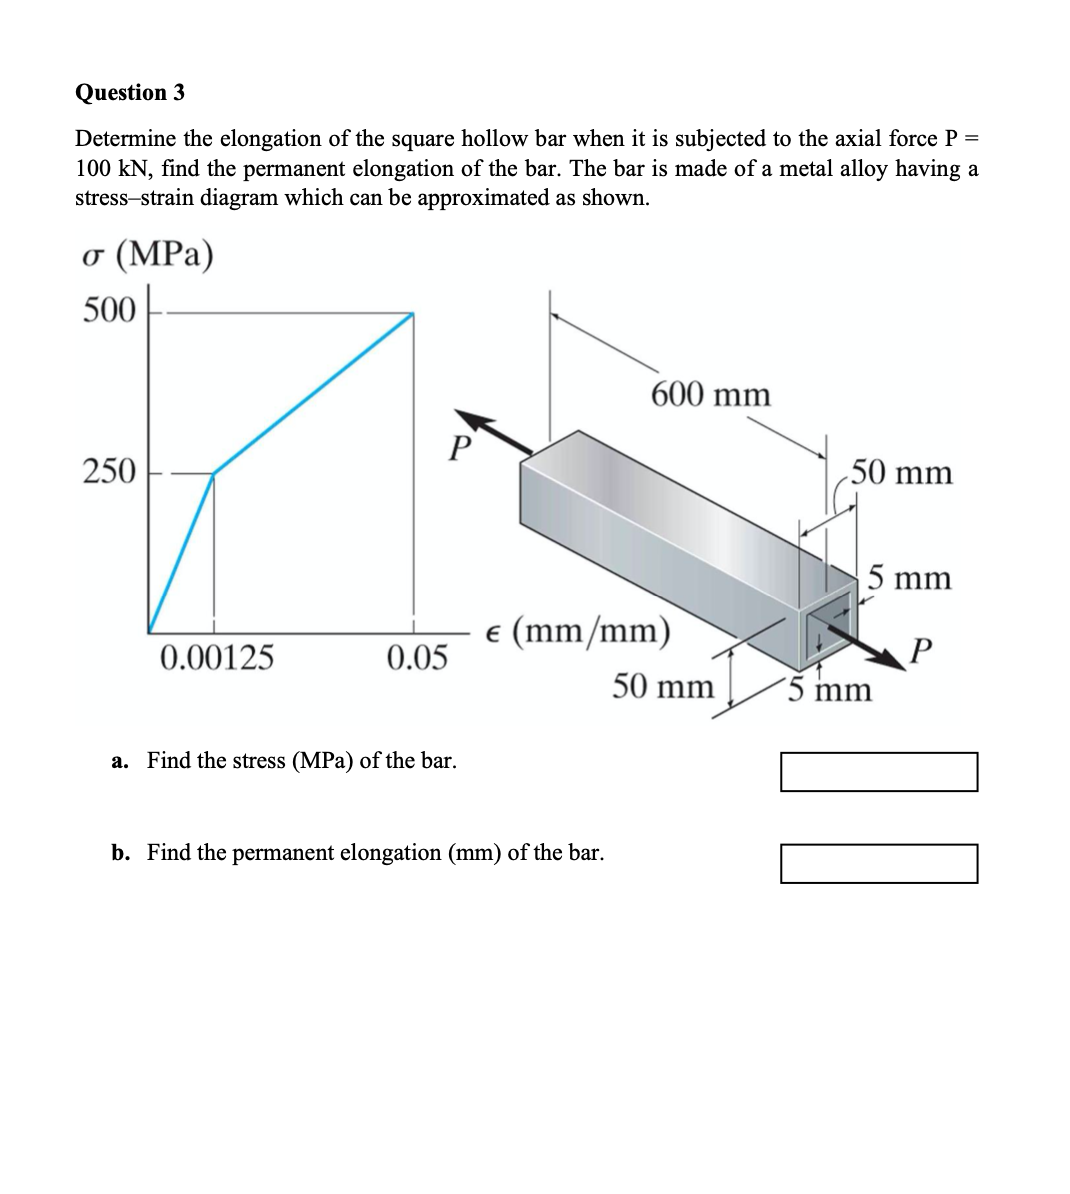 Question 3
Determine the elongation of the square hollow bar when it is subjected to the axial force P =
100 kN, find the permanent elongation of the bar. The bar is made of a metal alloy having a
stress-strain diagram which can be approximated as shown.
o (MPa)
500
600 mm
P
50 mm
250
5 mm
e (mm/mm)
0.00125
0.05
50 mm
´5 mm
a. Find the stress (MPa) of the bar.
b. Find the permanent elongation (mm) of the bar.
